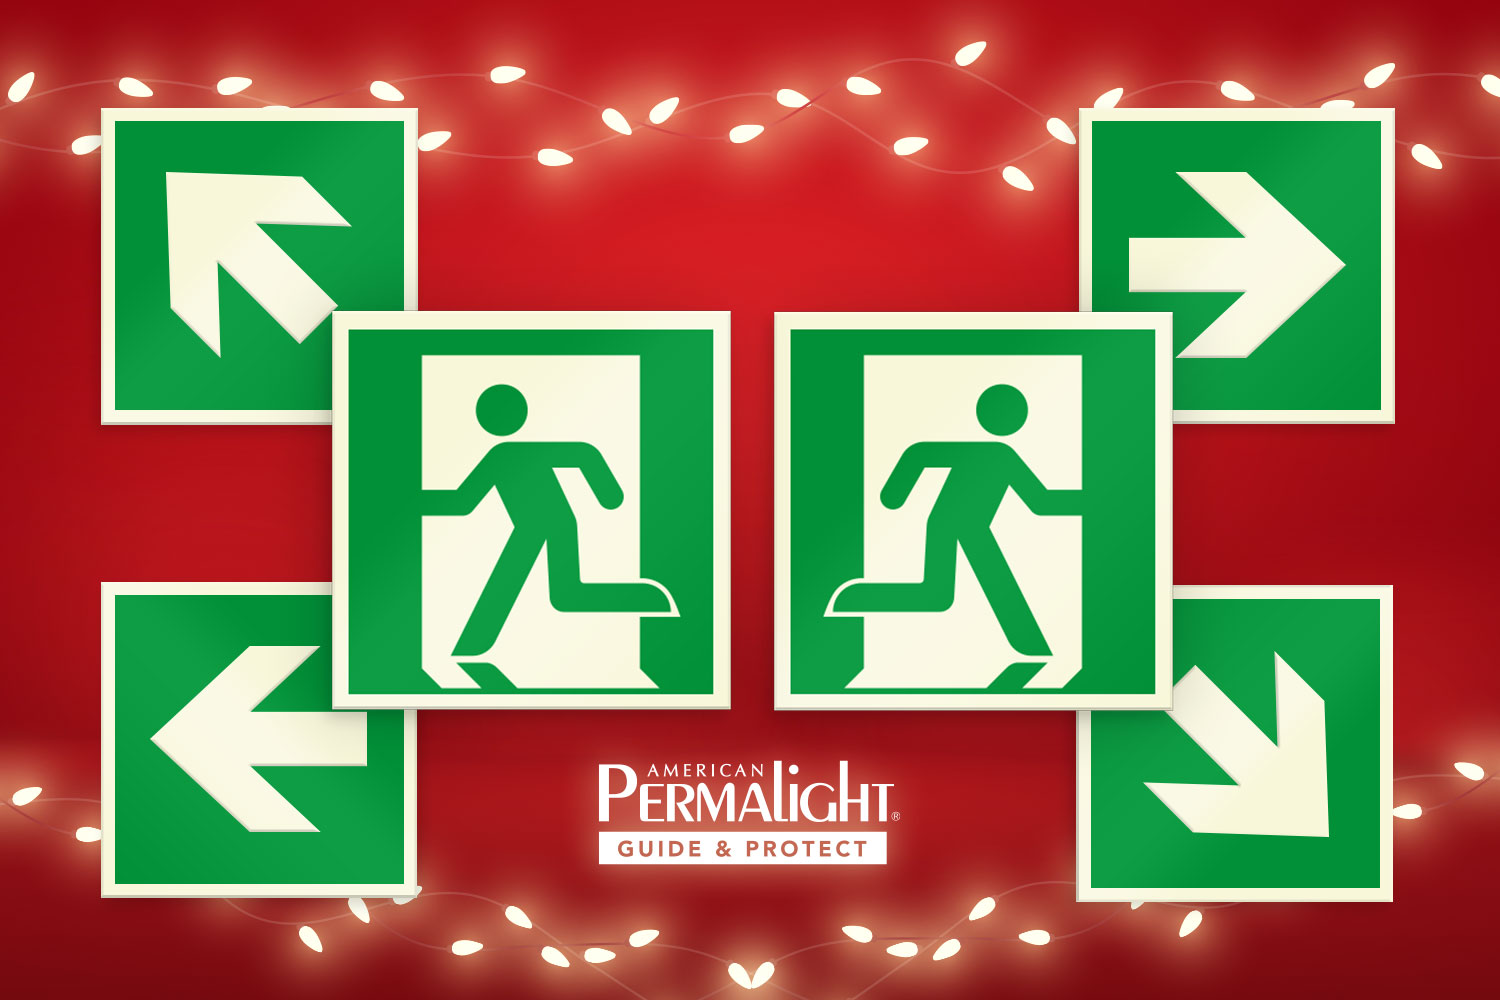 Running Man Safety with PERMALIGHT®